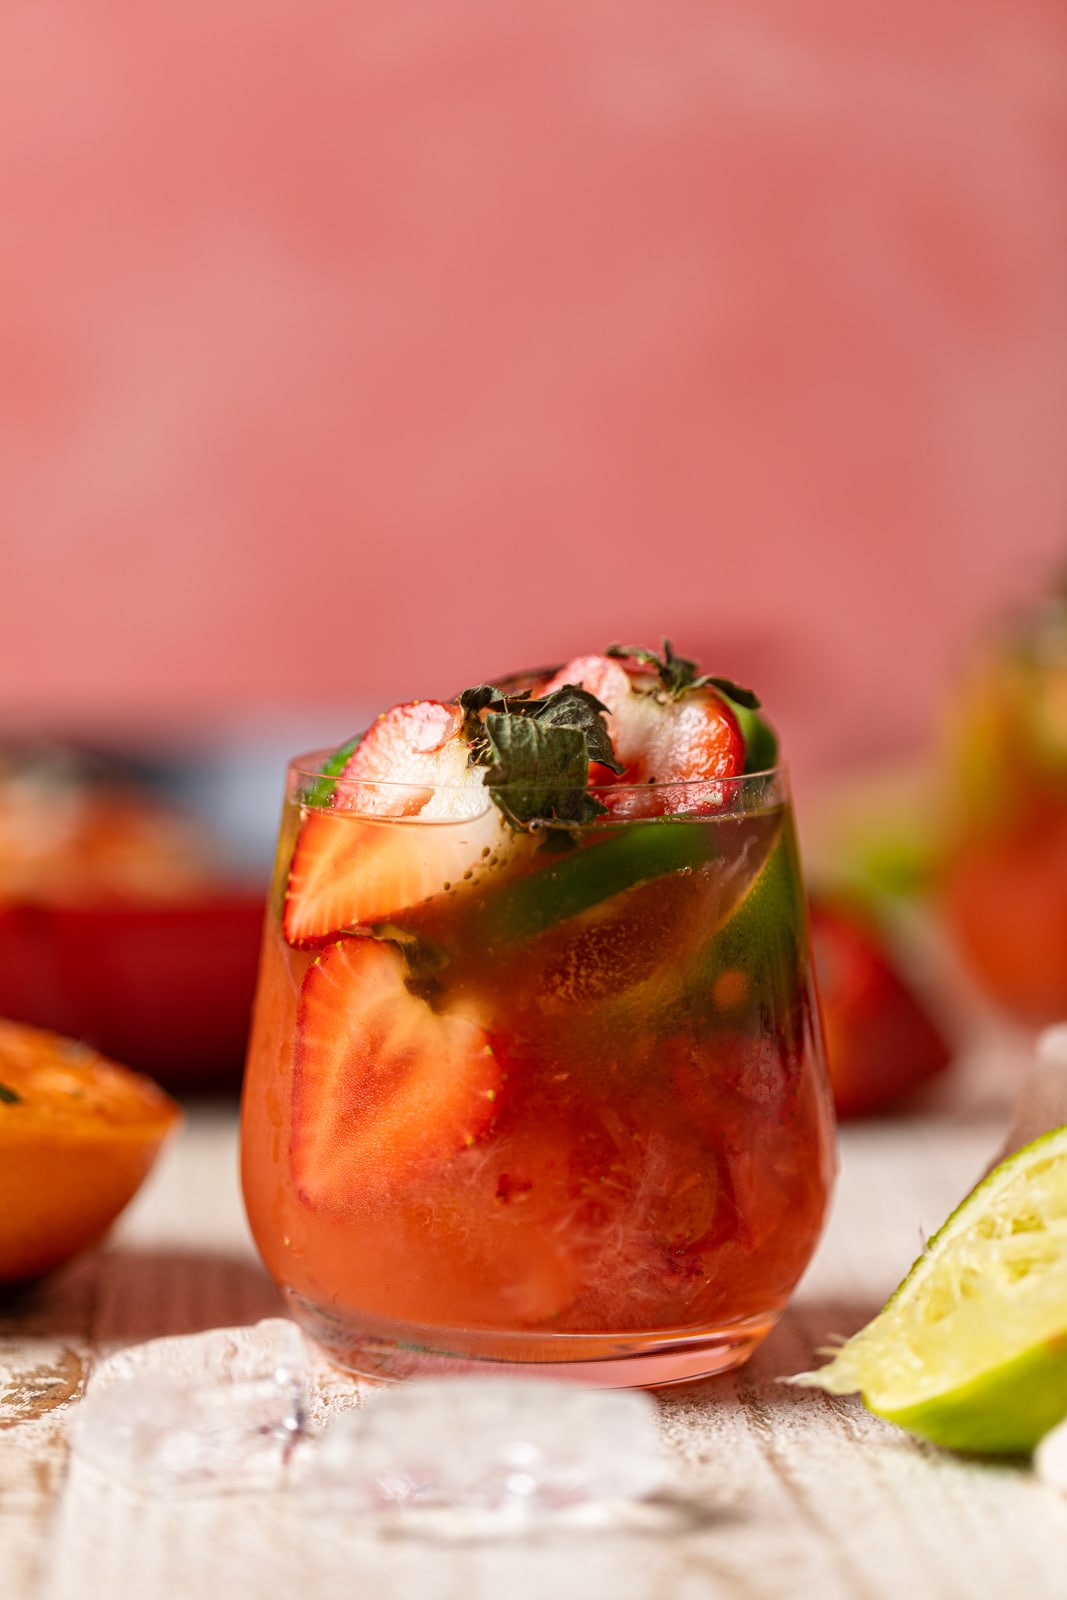 Spicy Grapefruit Jalapeño Mocktail stuffed with halved-strawberries and jalapeno slices